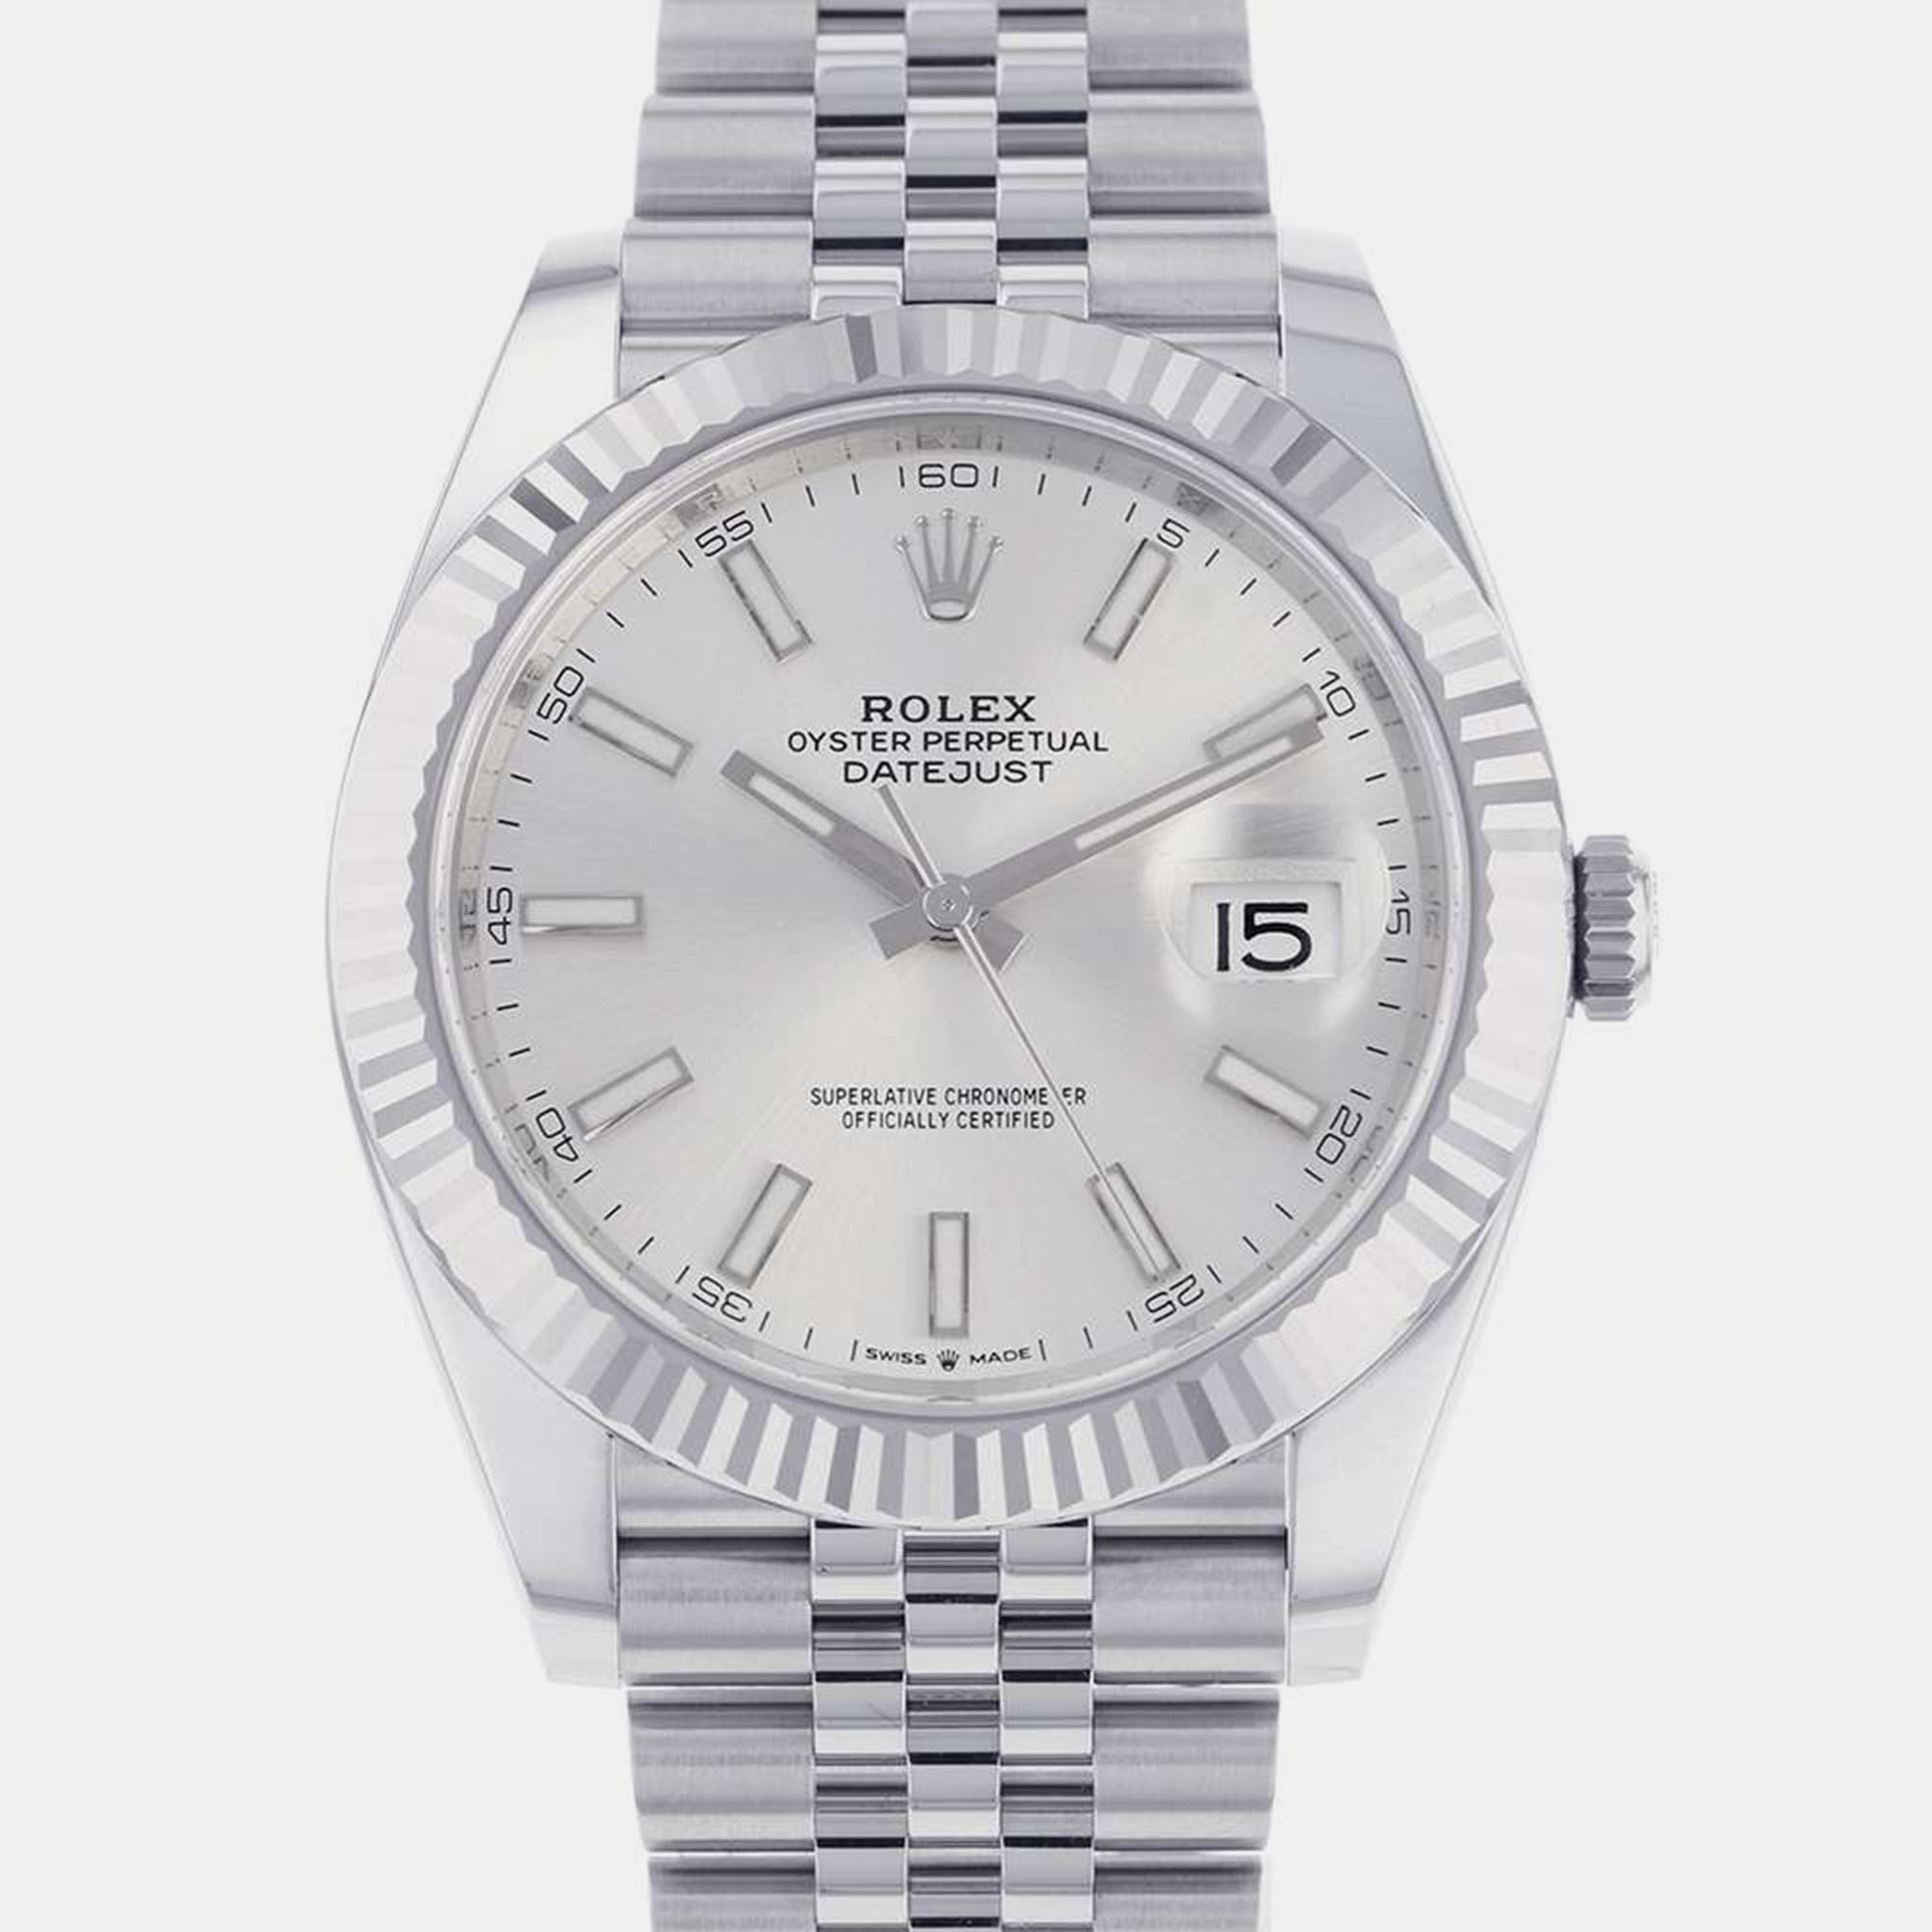 Rolex Silver 18k White Gold And Stainless Steel Datejust 126334 Automatic Men's Wristwatch 41 Mm